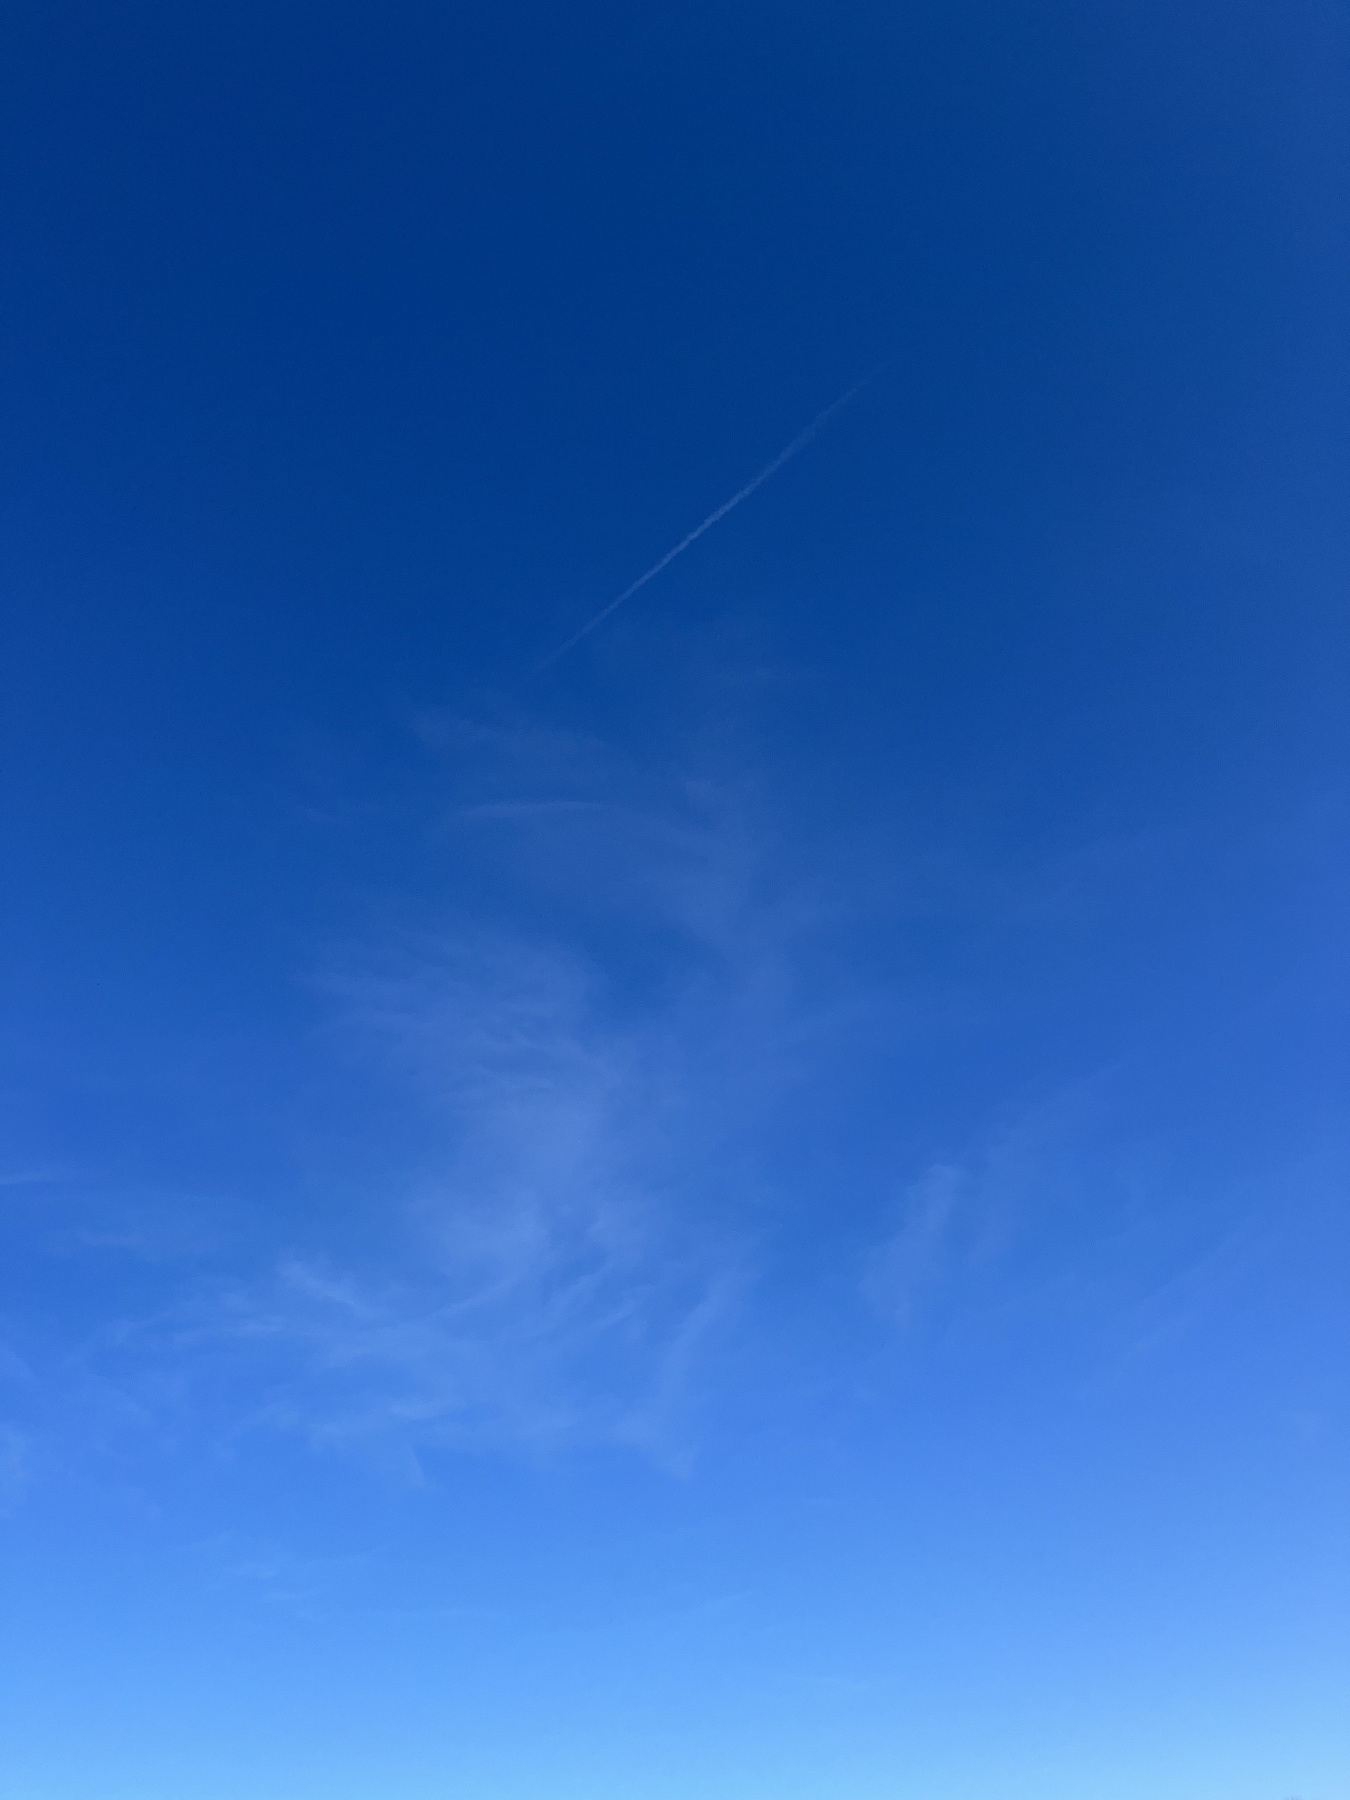 Clear blue sky with a single, slender contrail is present amidst faint wisps of clouds.